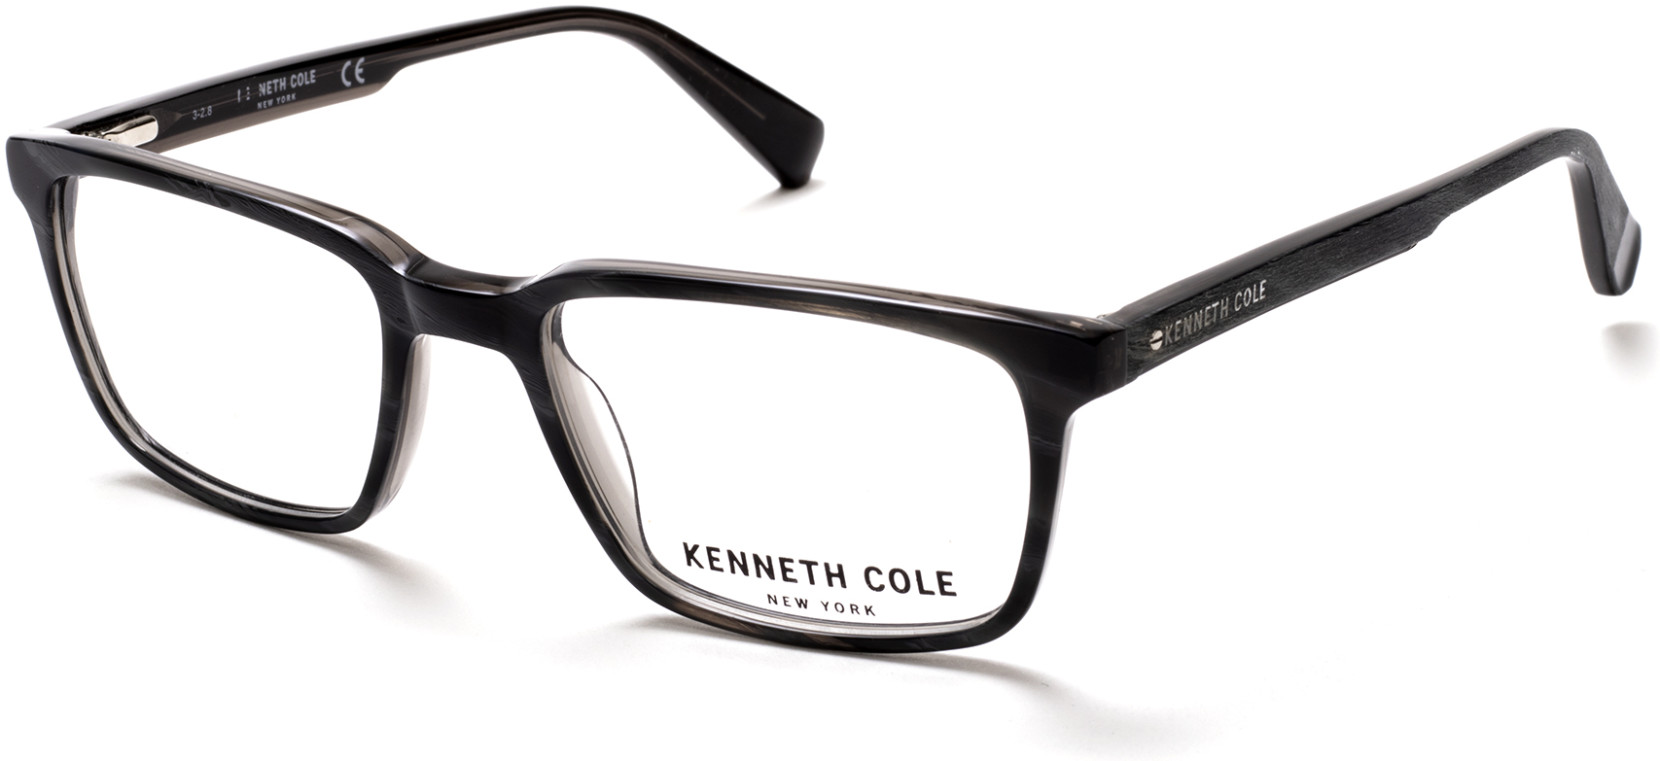 KENNETH COLE NY 0293 020